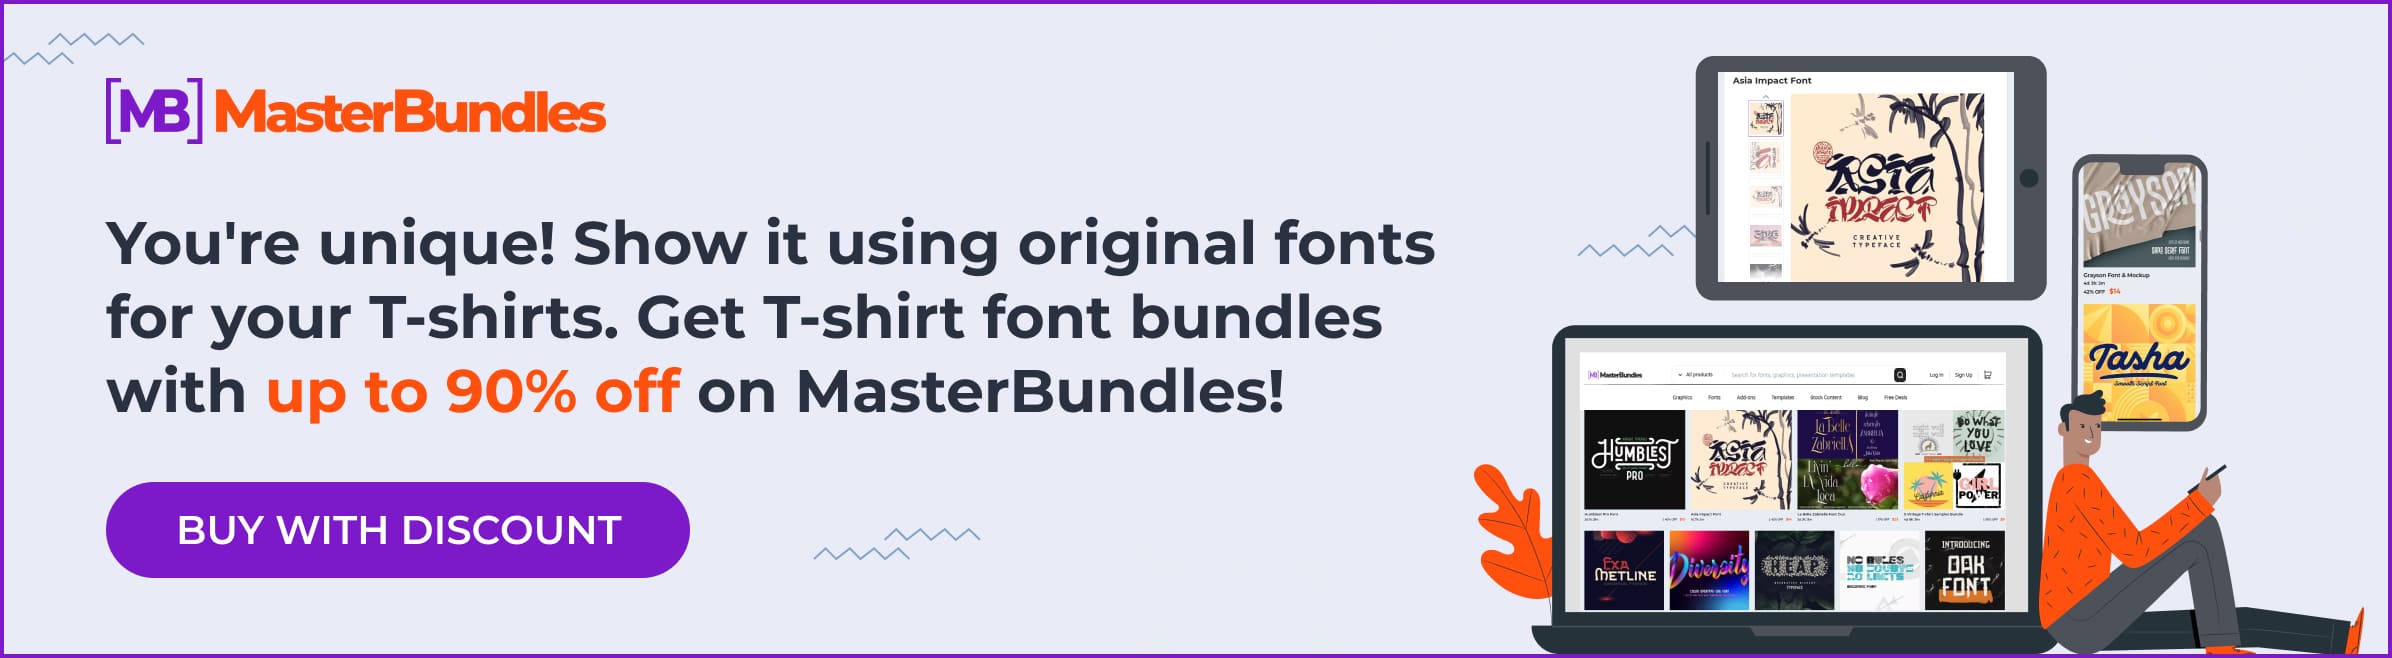 Banner for T-shirt fonts with discount.